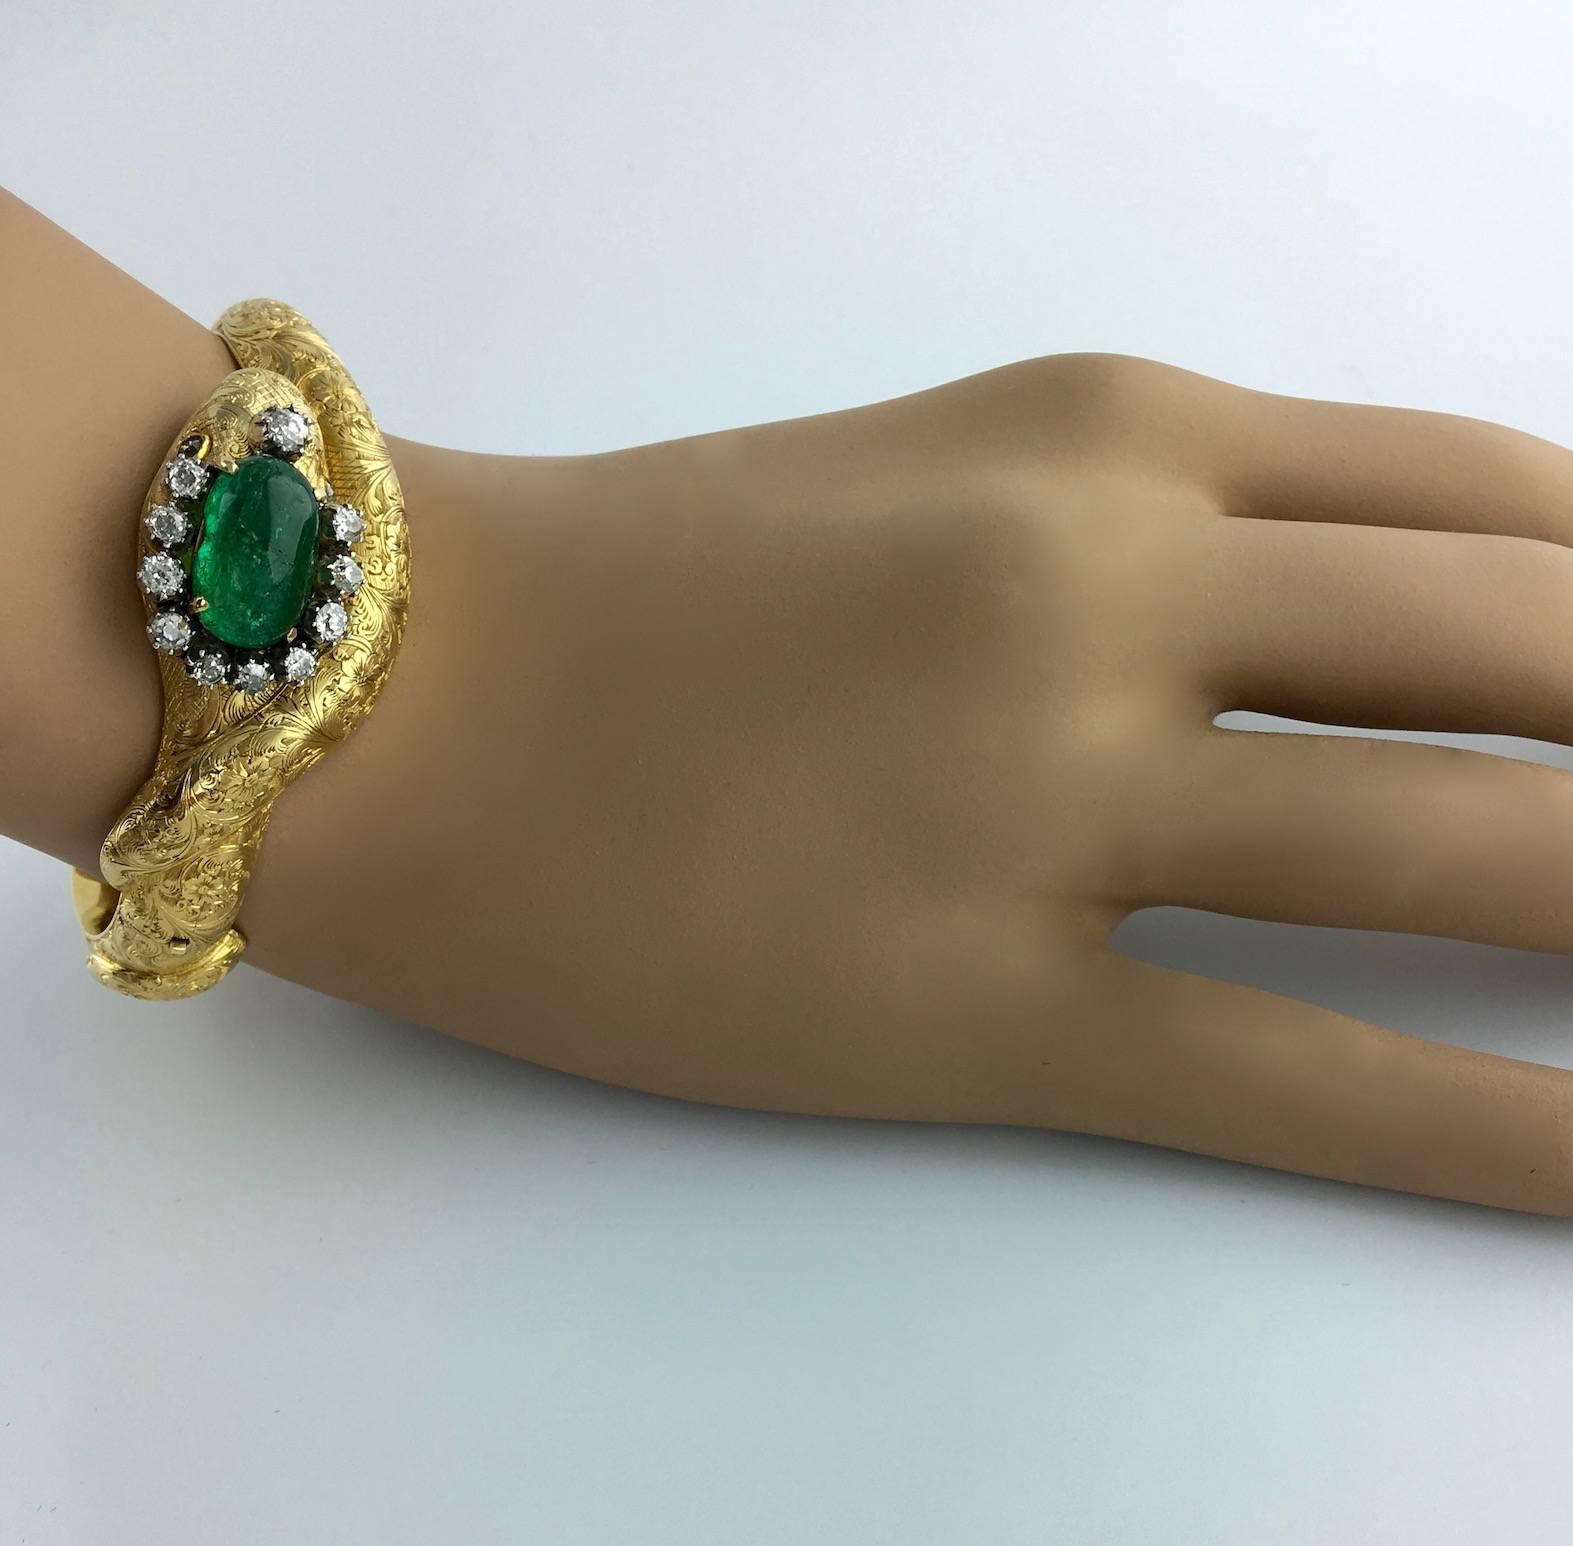 Serpent Snake Bangle Mid-19th Century. The head is crowned by a cabochon Emerald (more than 5.00 carats) surrounded by Old mine cut Diamond.

Designed as an interlocking snake, the head highlighted by a cabochon Emerald surrounded by Old mine cut